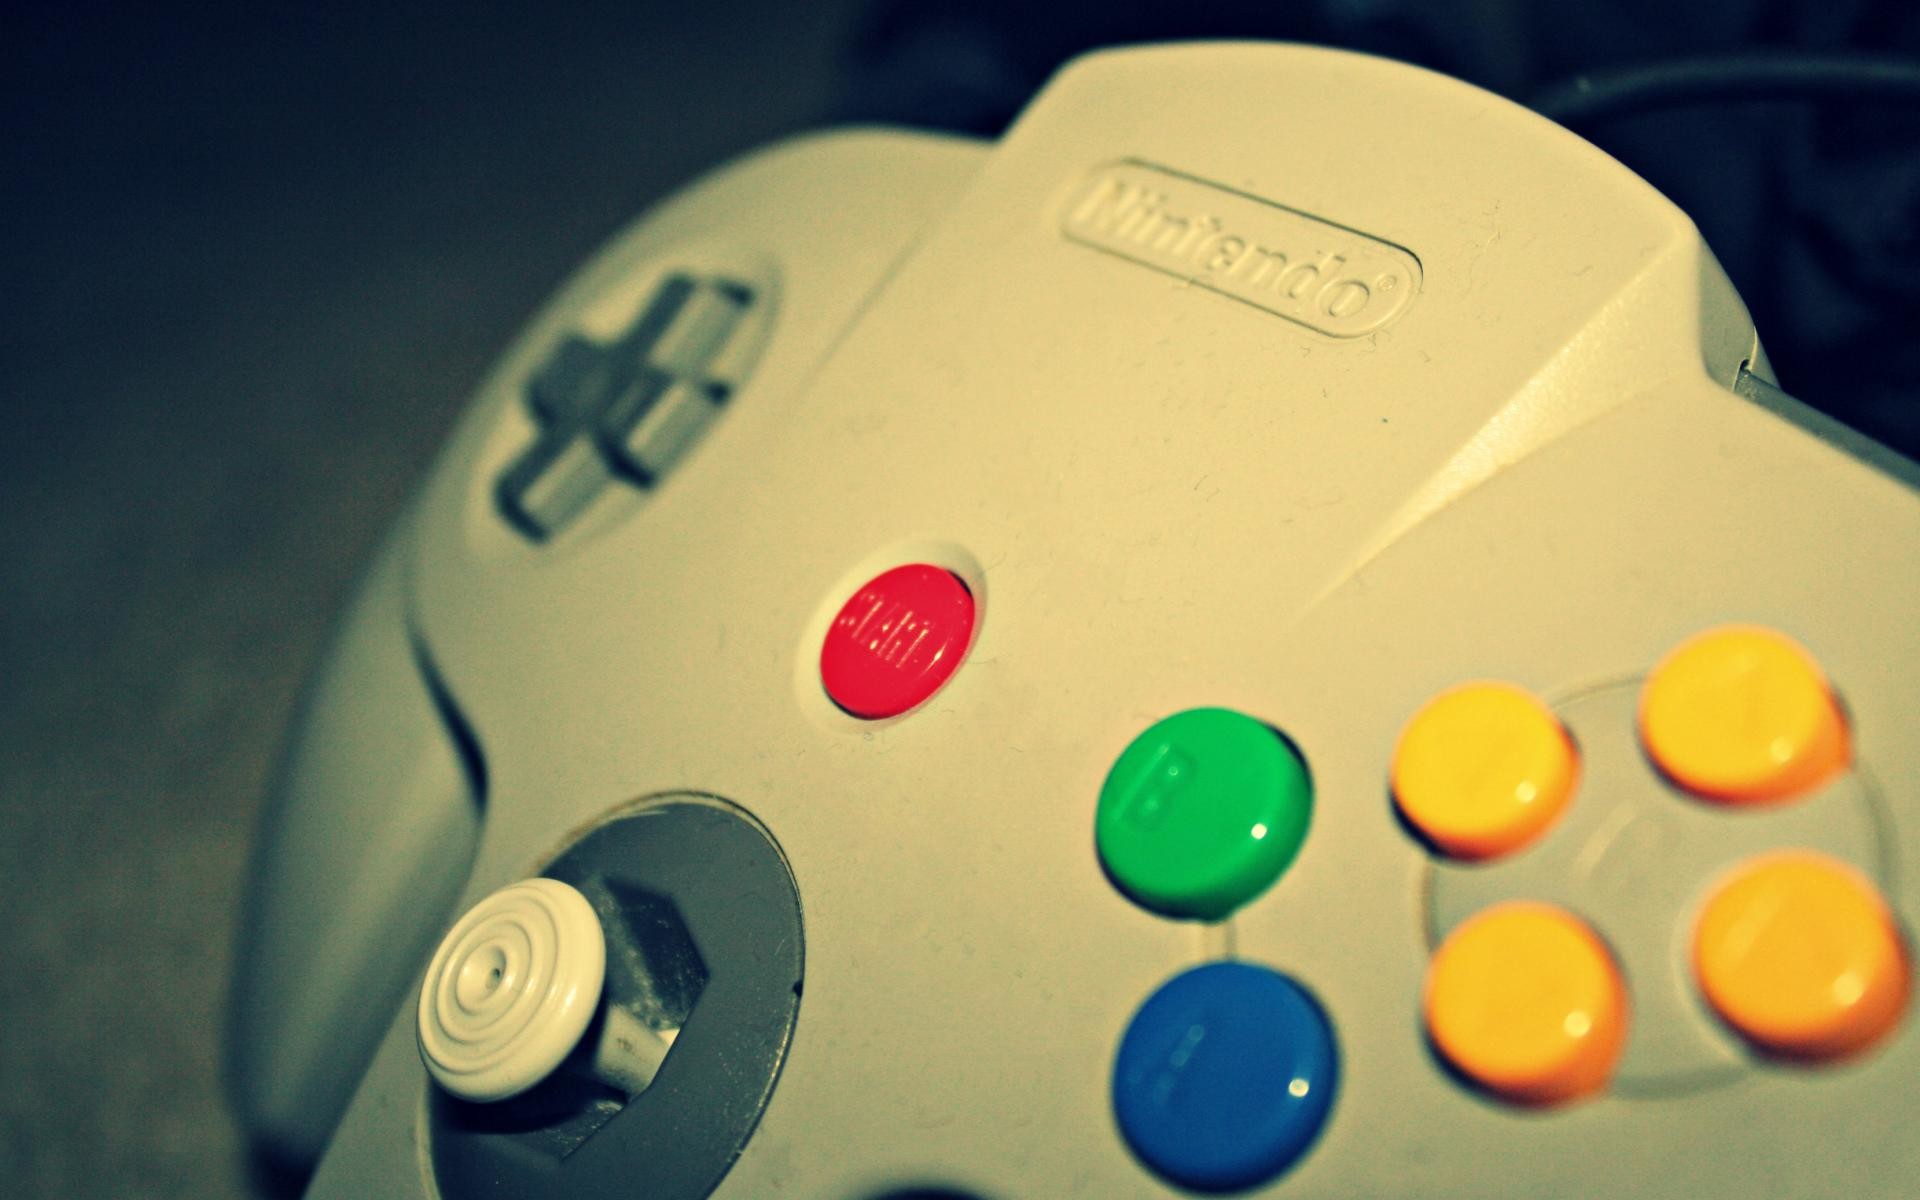 Nintendo 64 1080P 2k 4k HD wallpapers backgrounds free download  Rare  Gallery